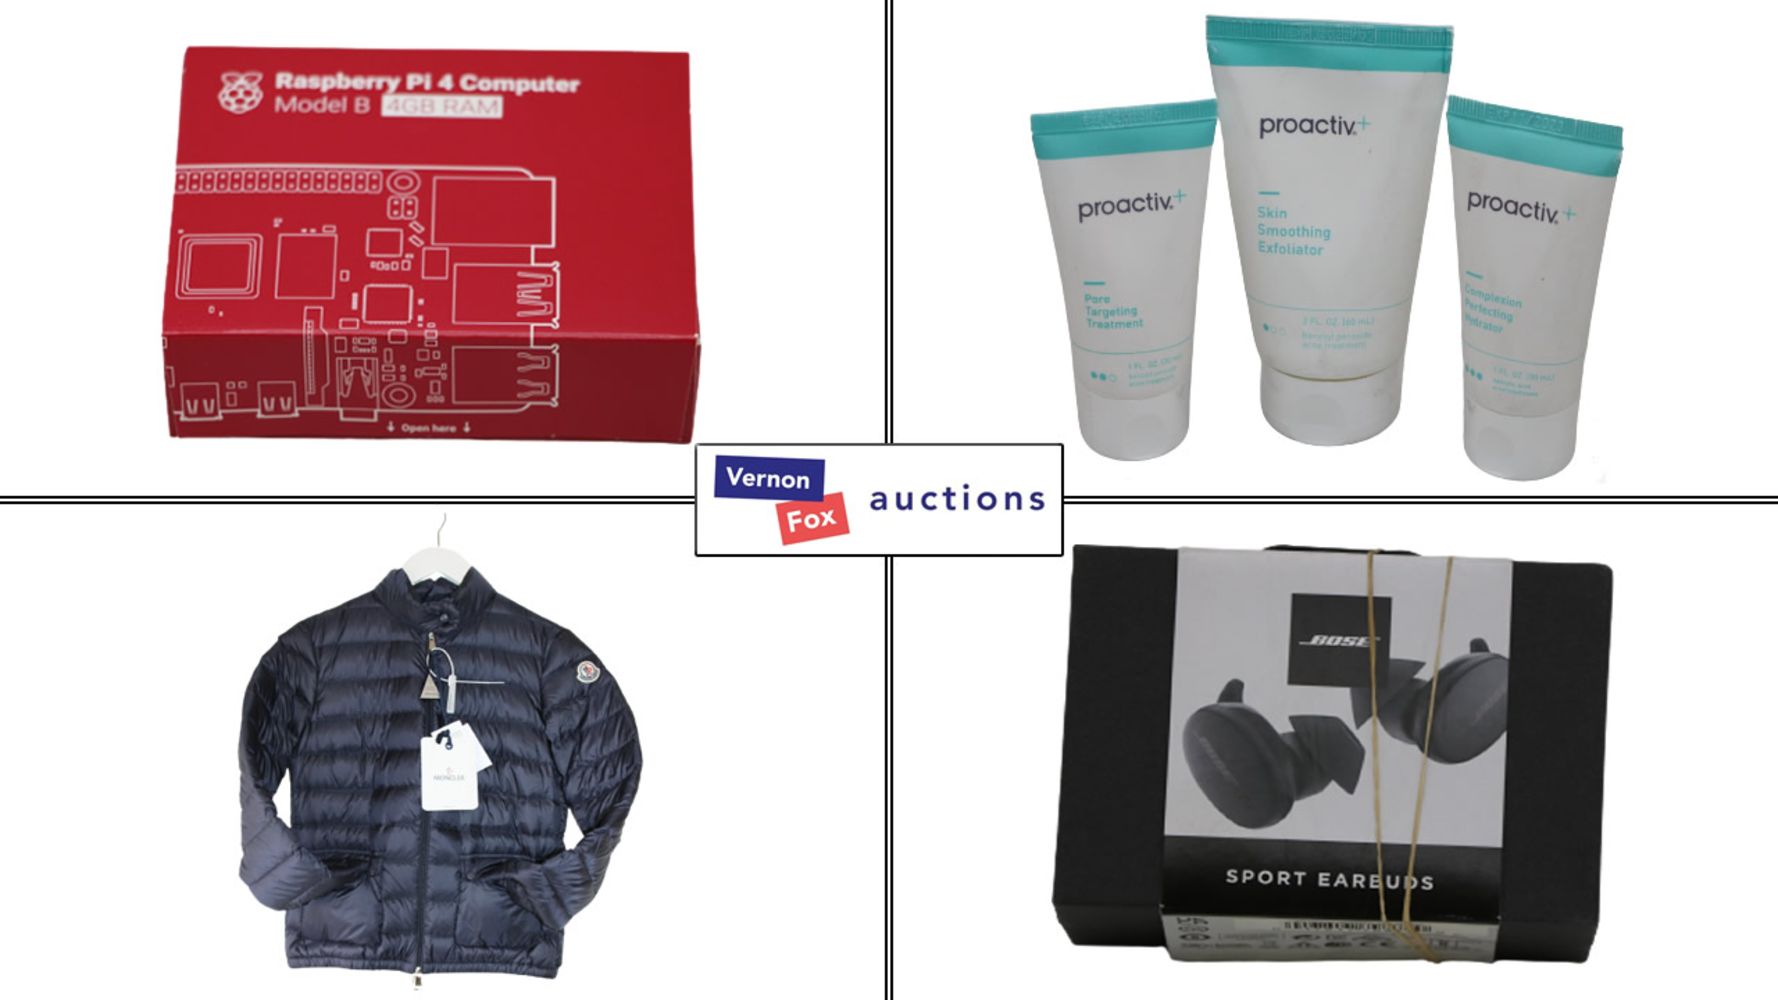 TIMED ONLINE AUCTION: IT Accessories, Toys, Clothing, Homewares and a wide range of other Commercial Goods, with FREE UK DELIVERY!